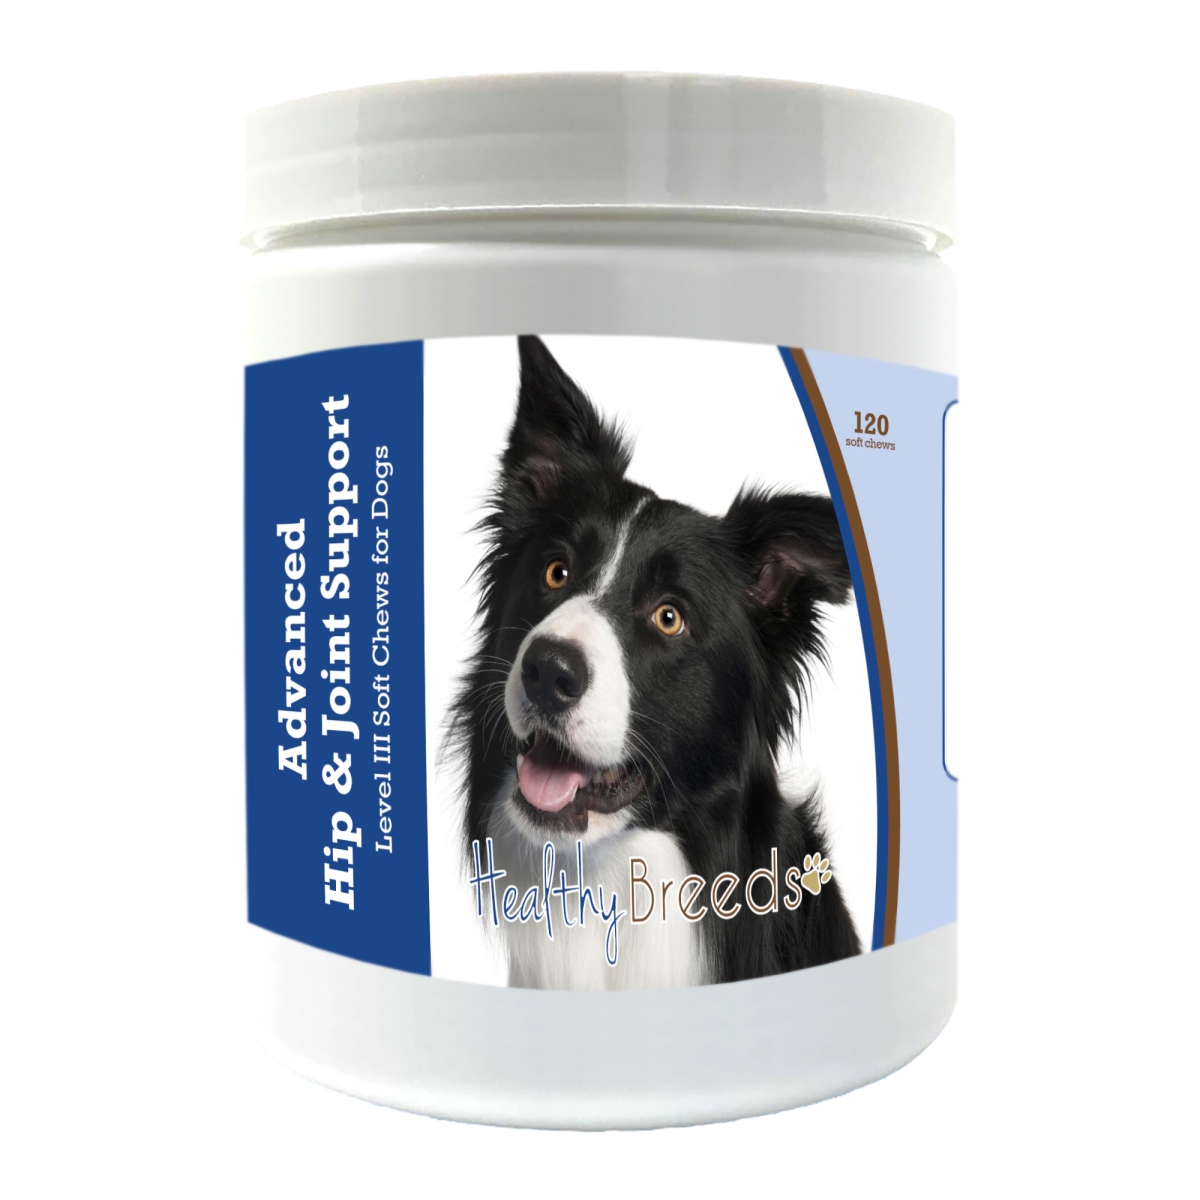 Picture of Healthy Breeds 192959897531 Border Collie Advanced Hip & Joint Support Level III Soft Chews for Dogs